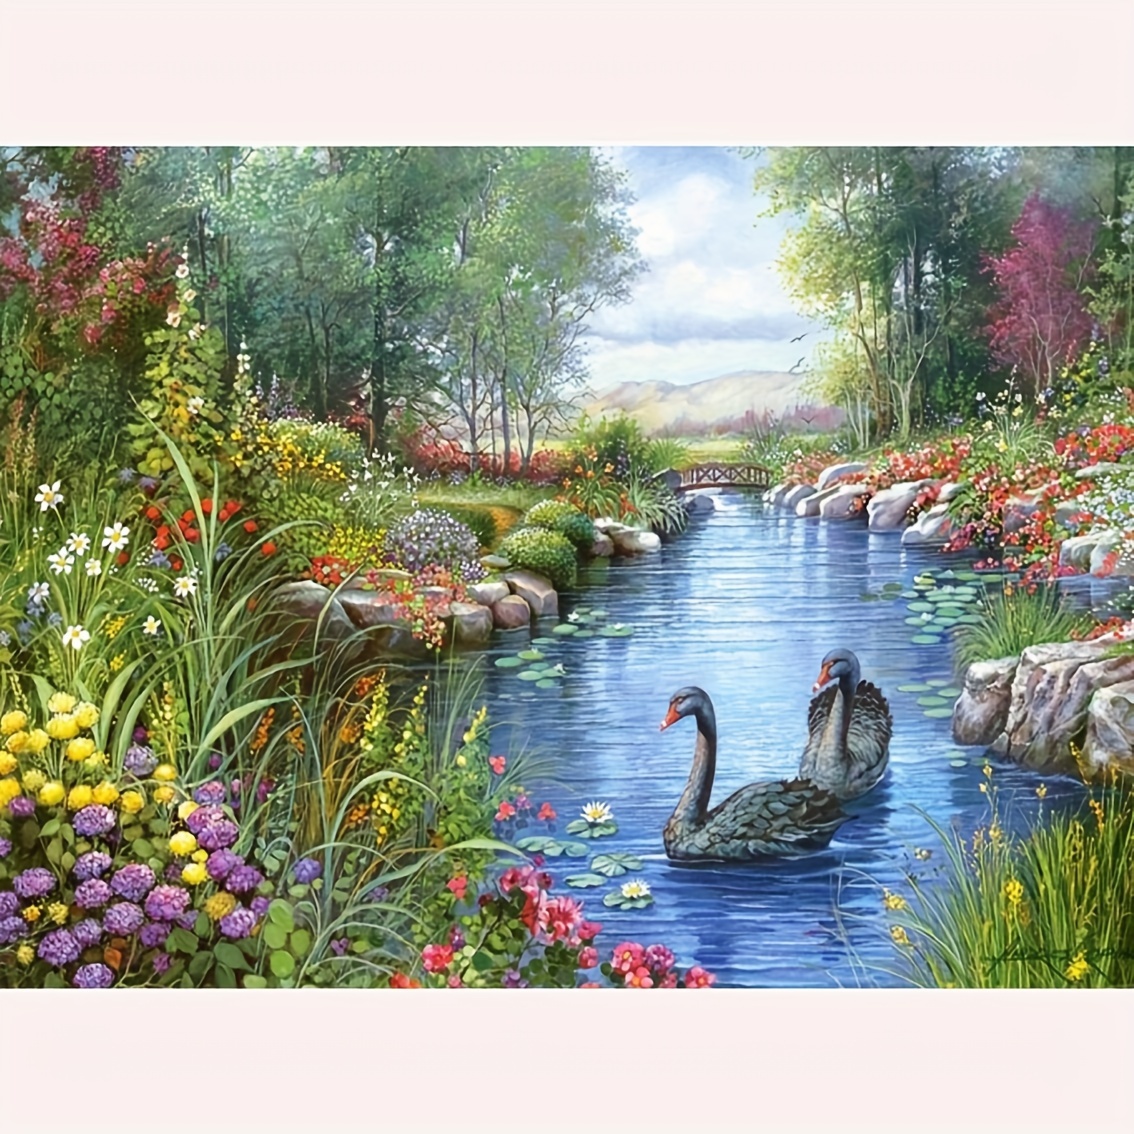 

Swan Lake 5d Diy Diamond Painting Kit - Full Round Drill, Acrylic Craft Set For Beginners, Perfect Home & Wall Decor Gift, 11.8x15.7 Inches